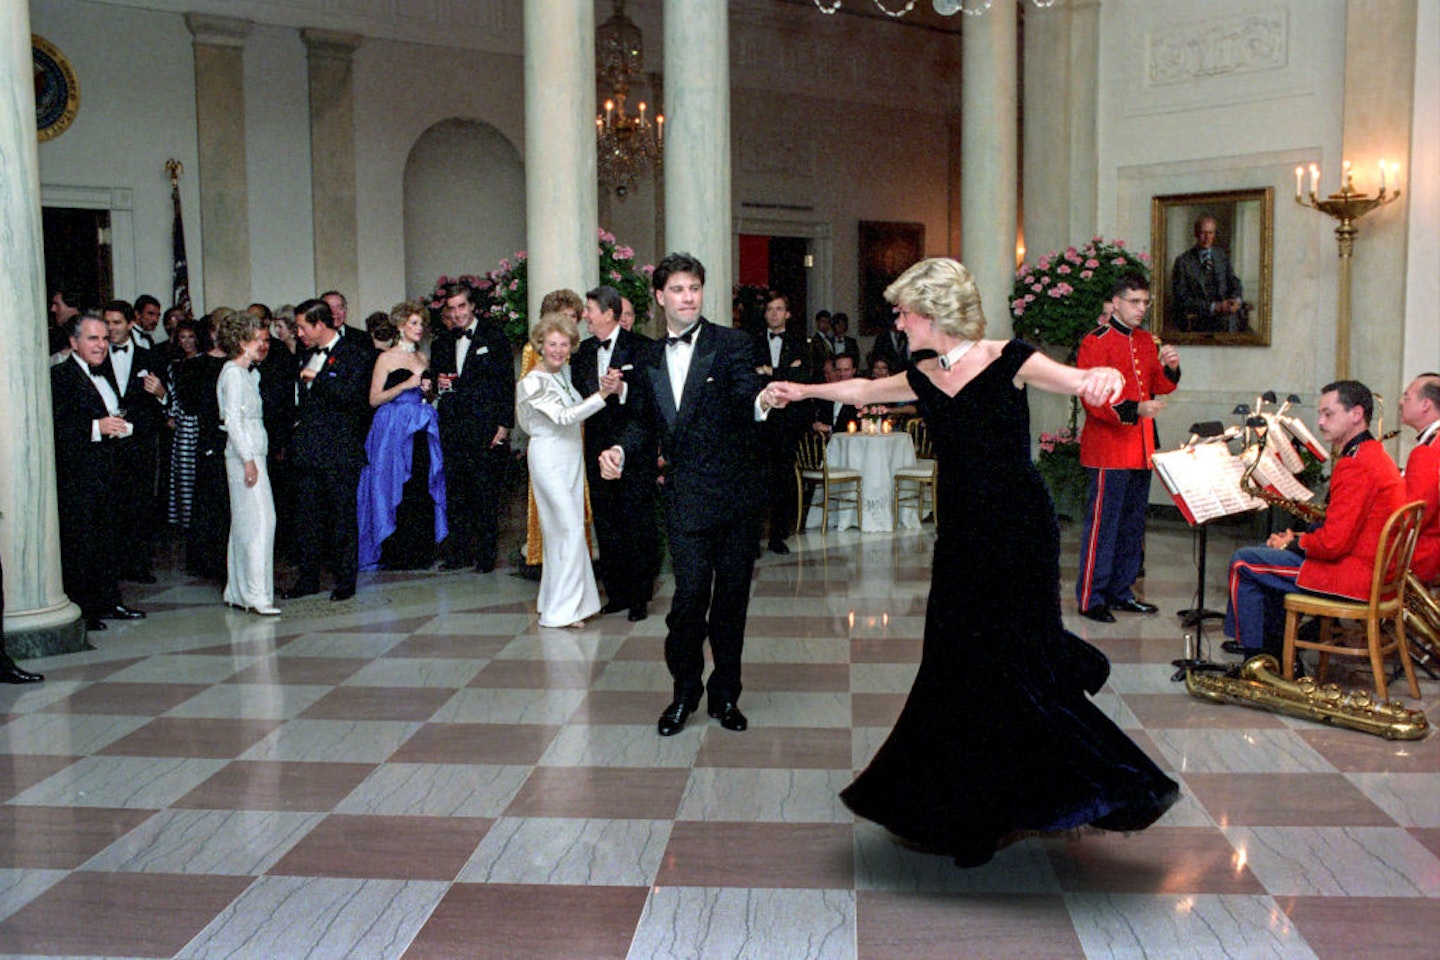 Princess Diana dancing with John Travolta in Cross Hall at the White House during an official dinner on November 9, 1985 in Washington, DC